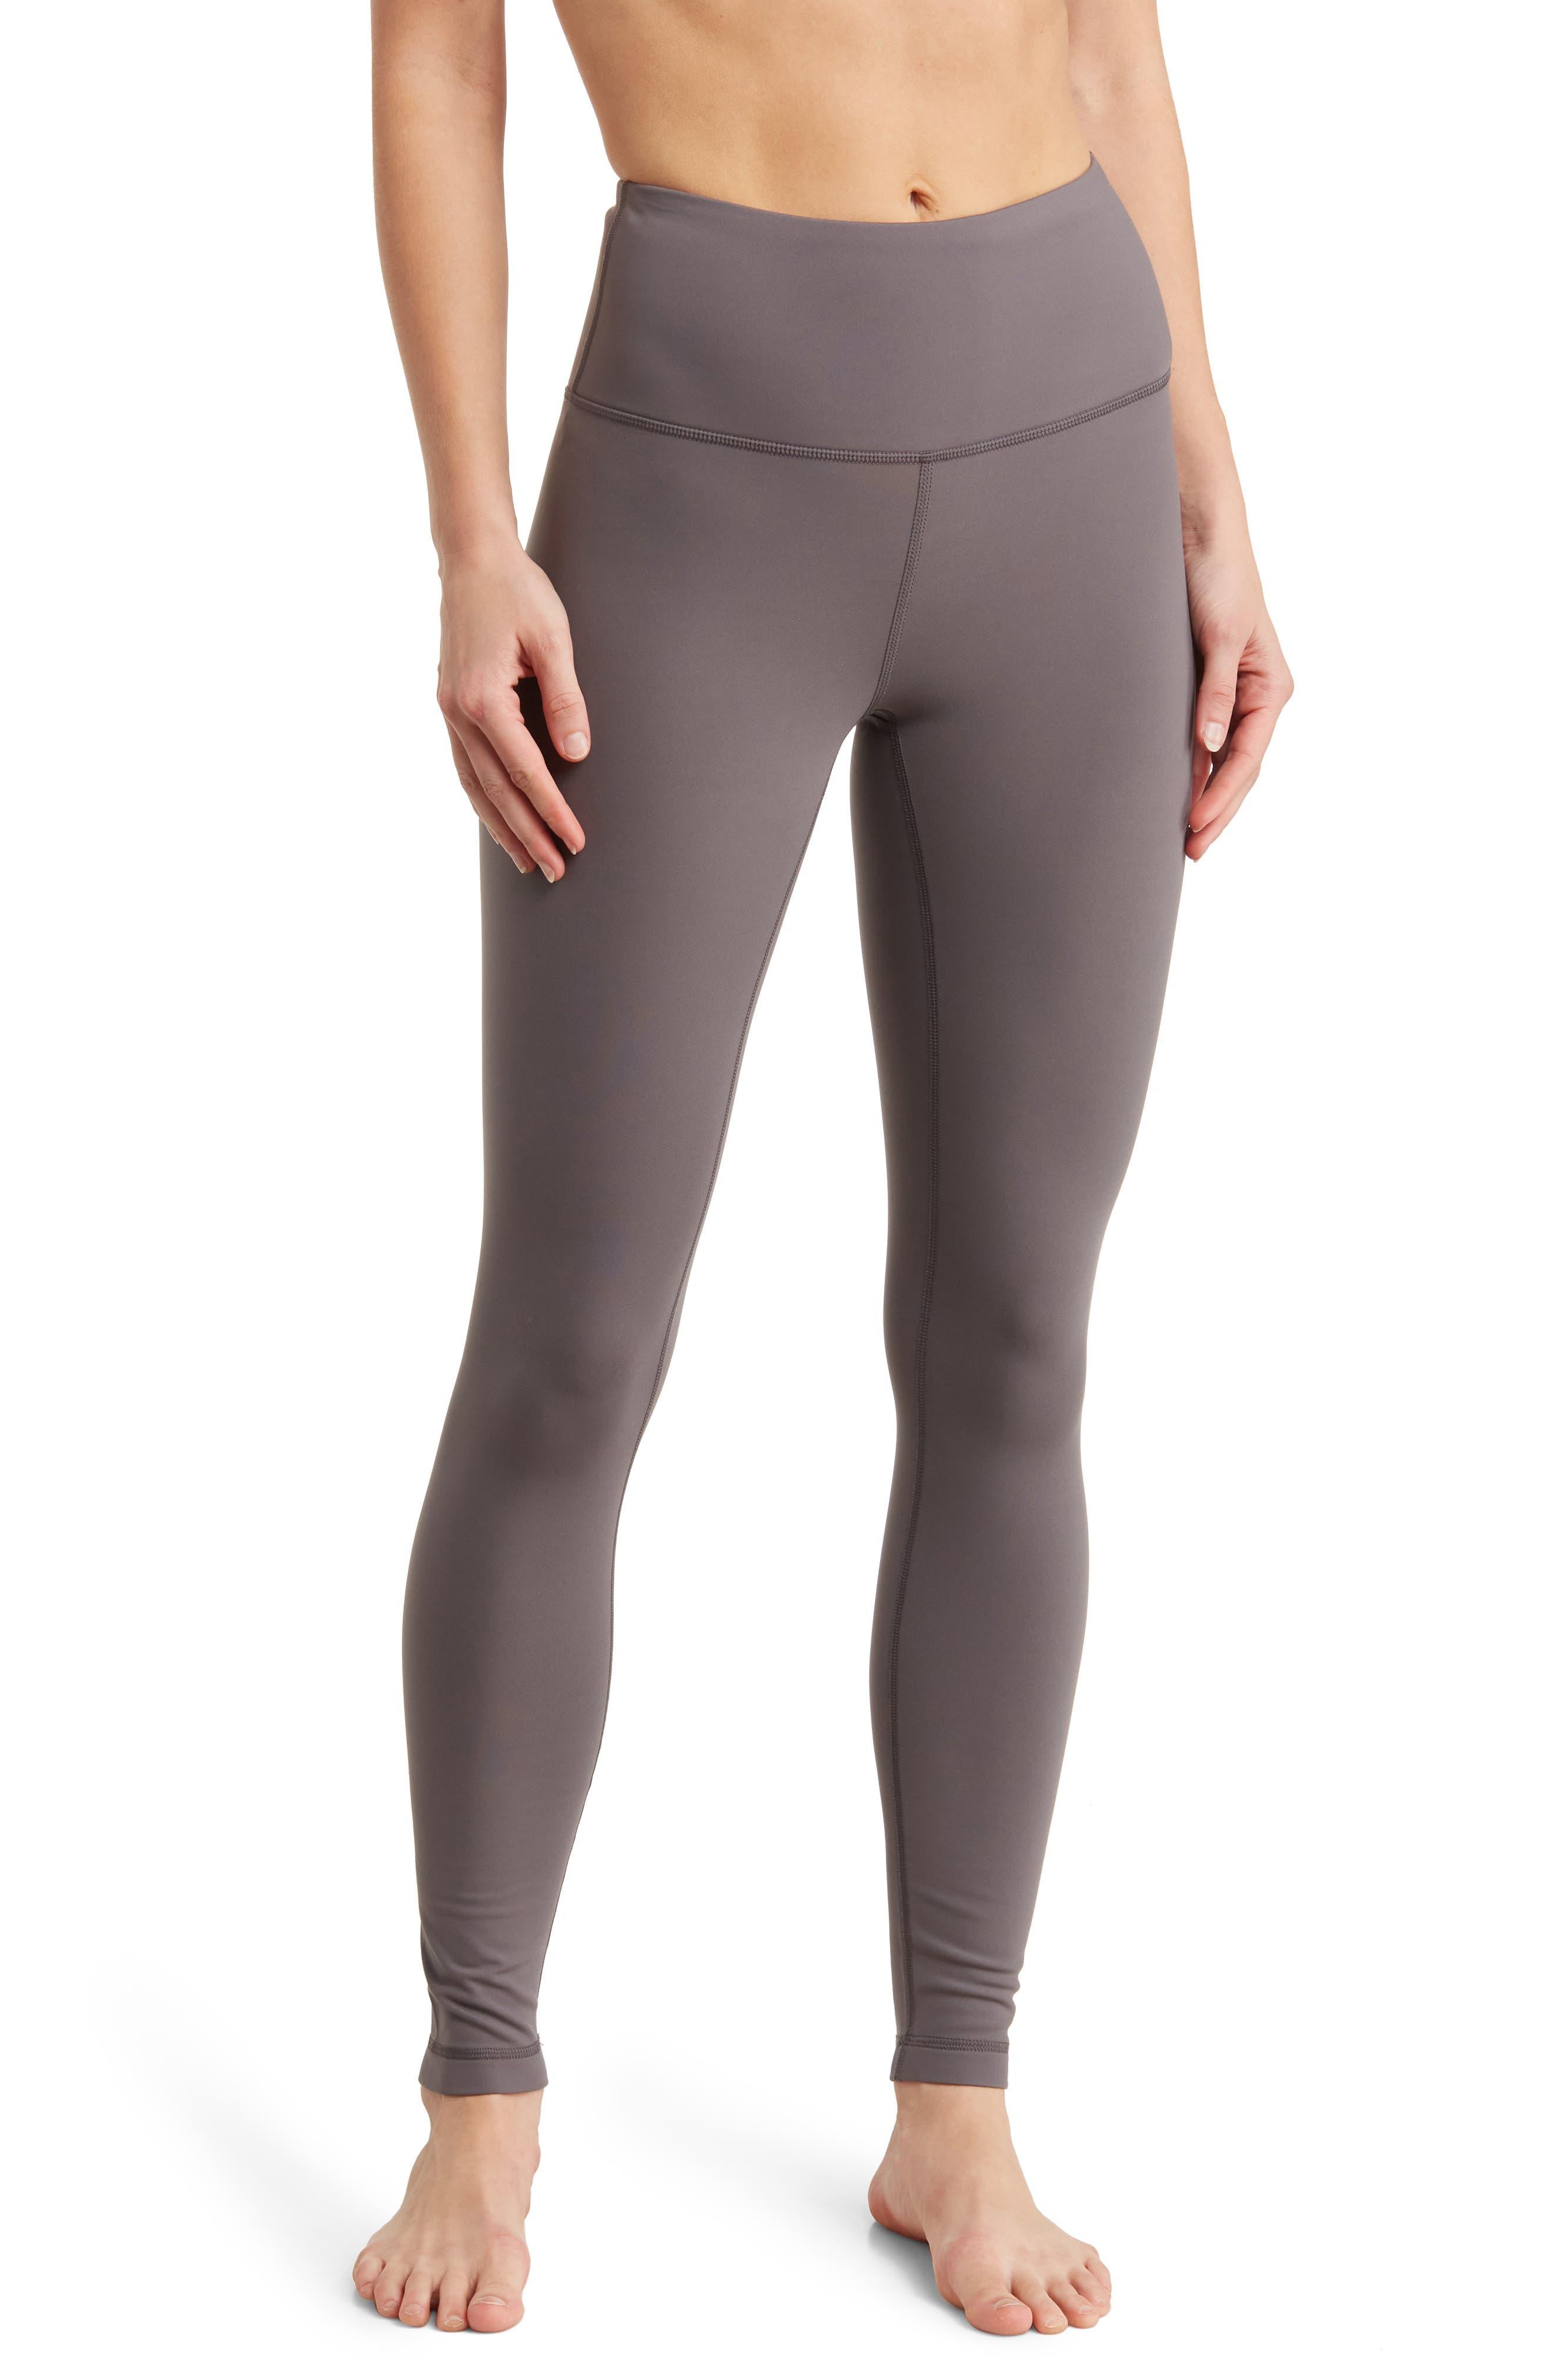 Lux Full Length Tights - Grey Speckle - Womens Activewear – Northern flex